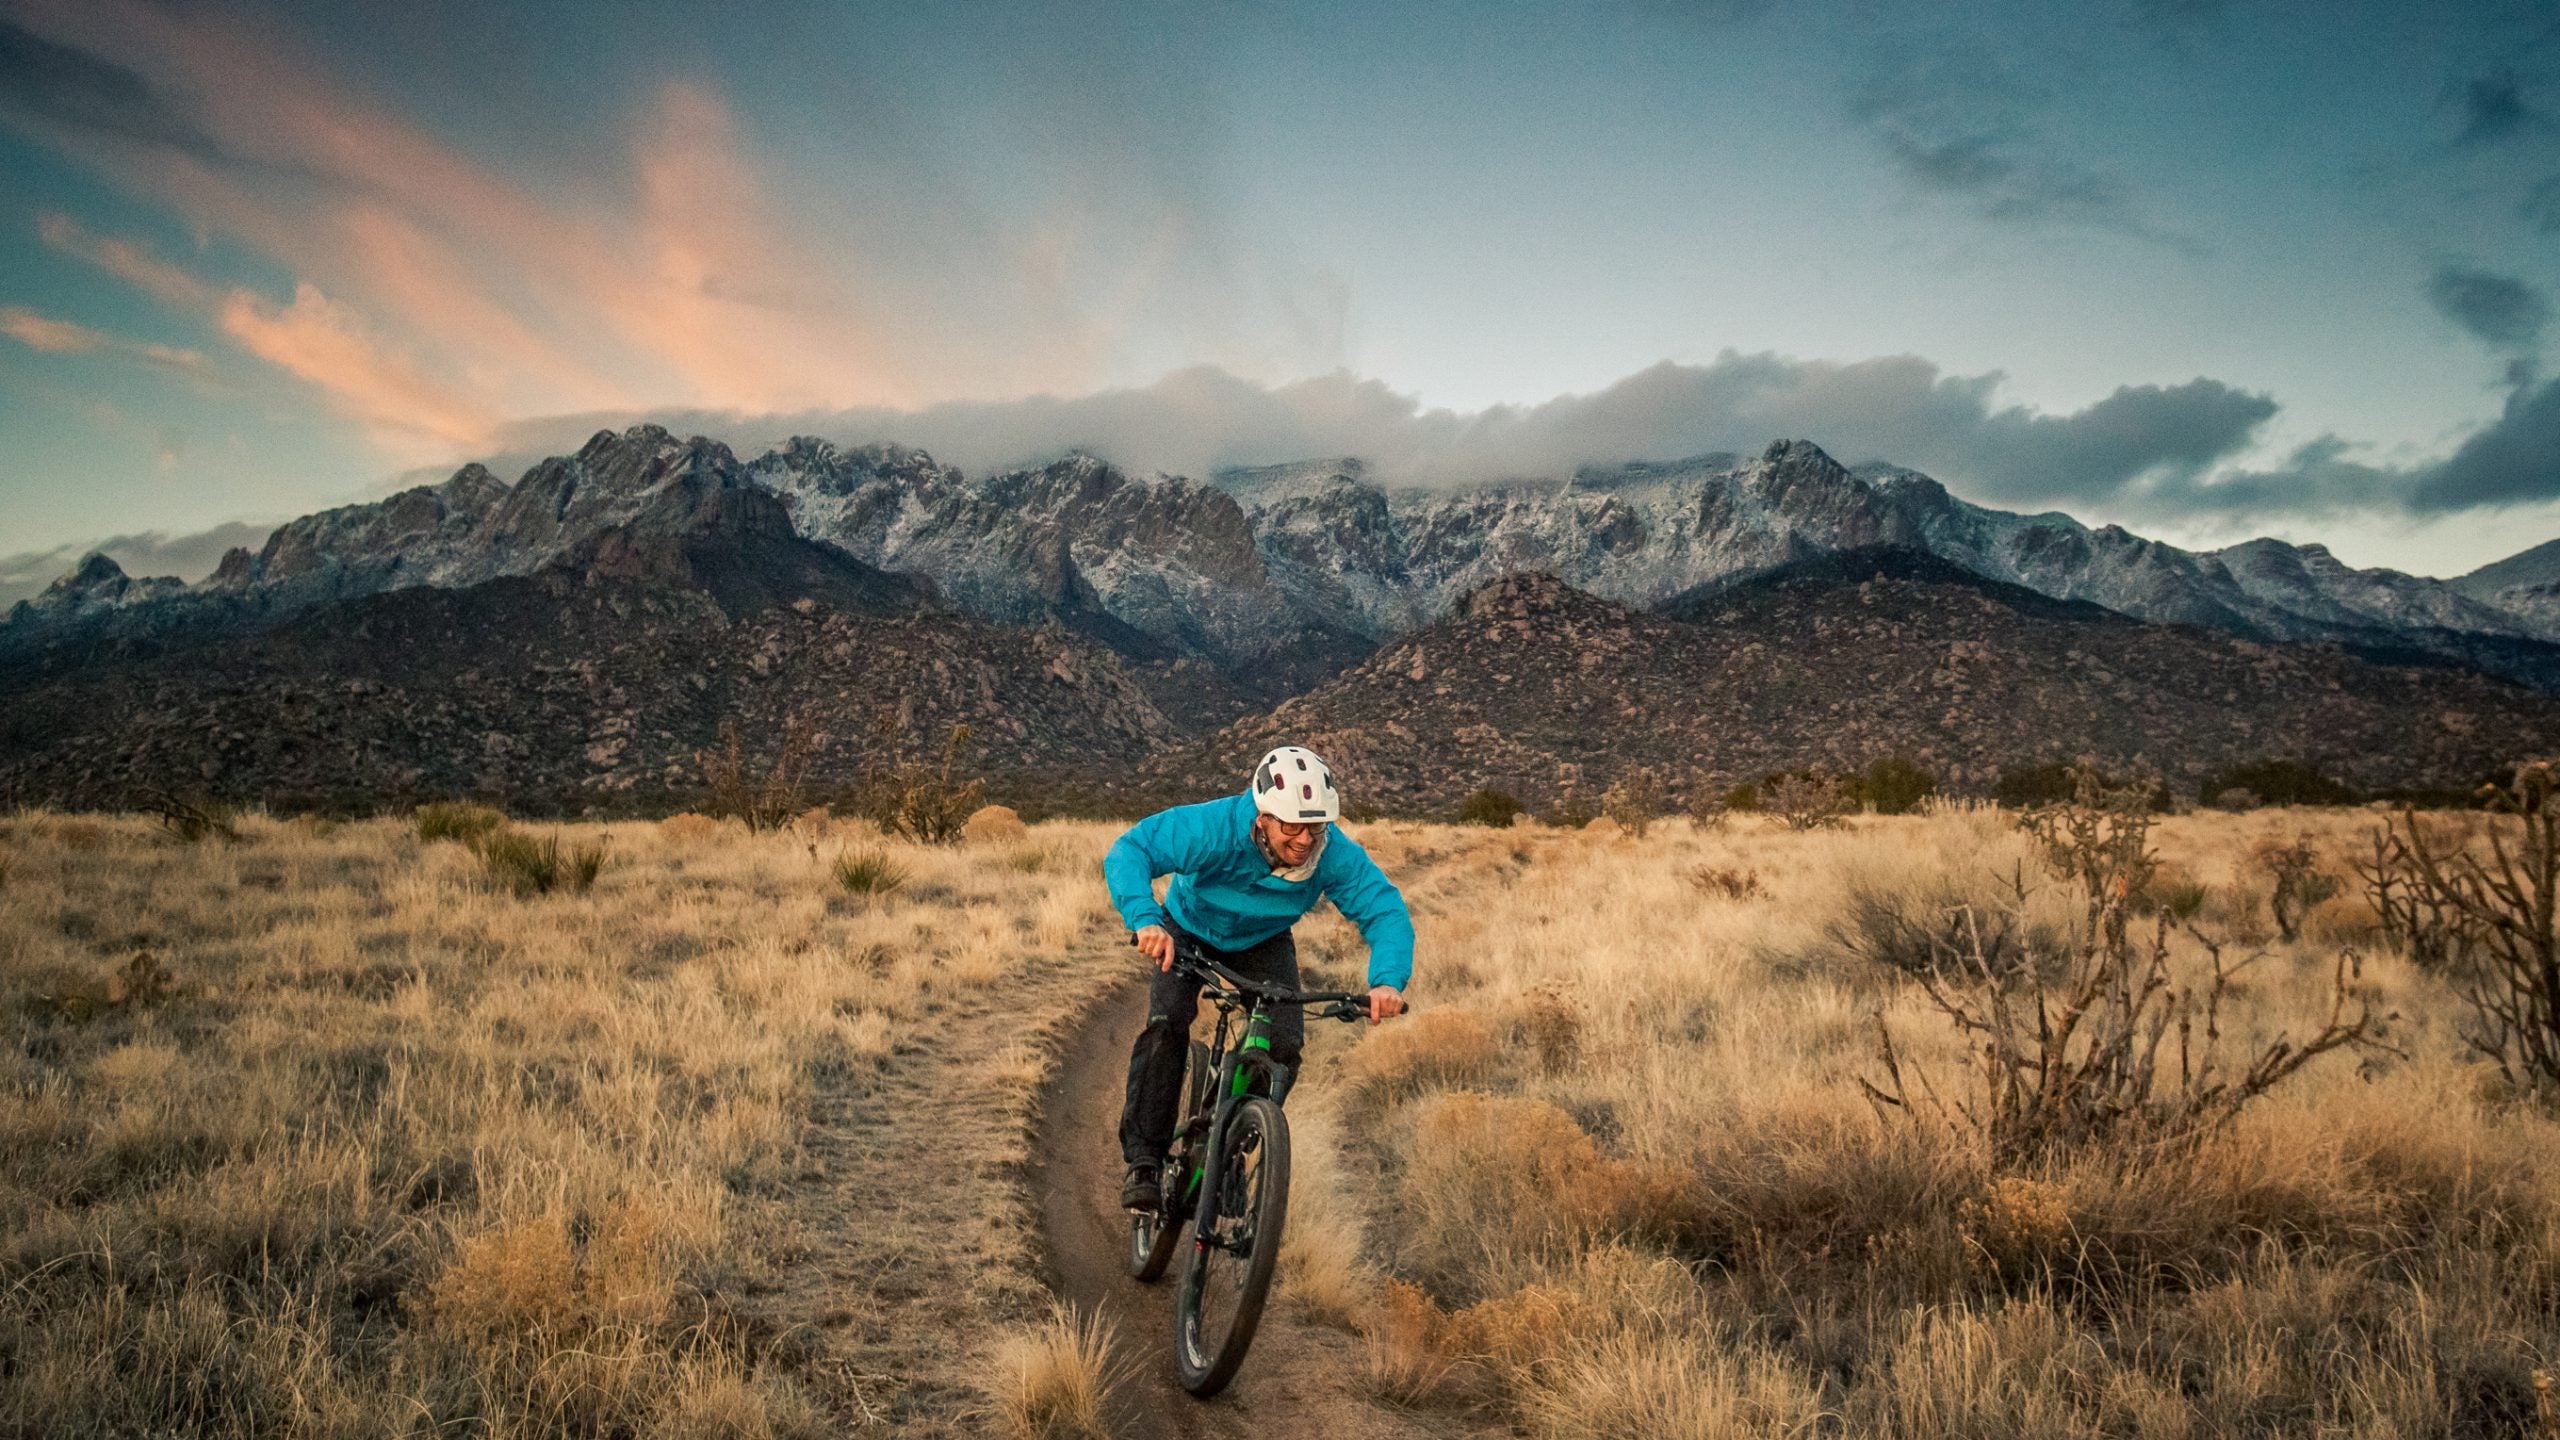 Premium Cycling Clothing from Colorado